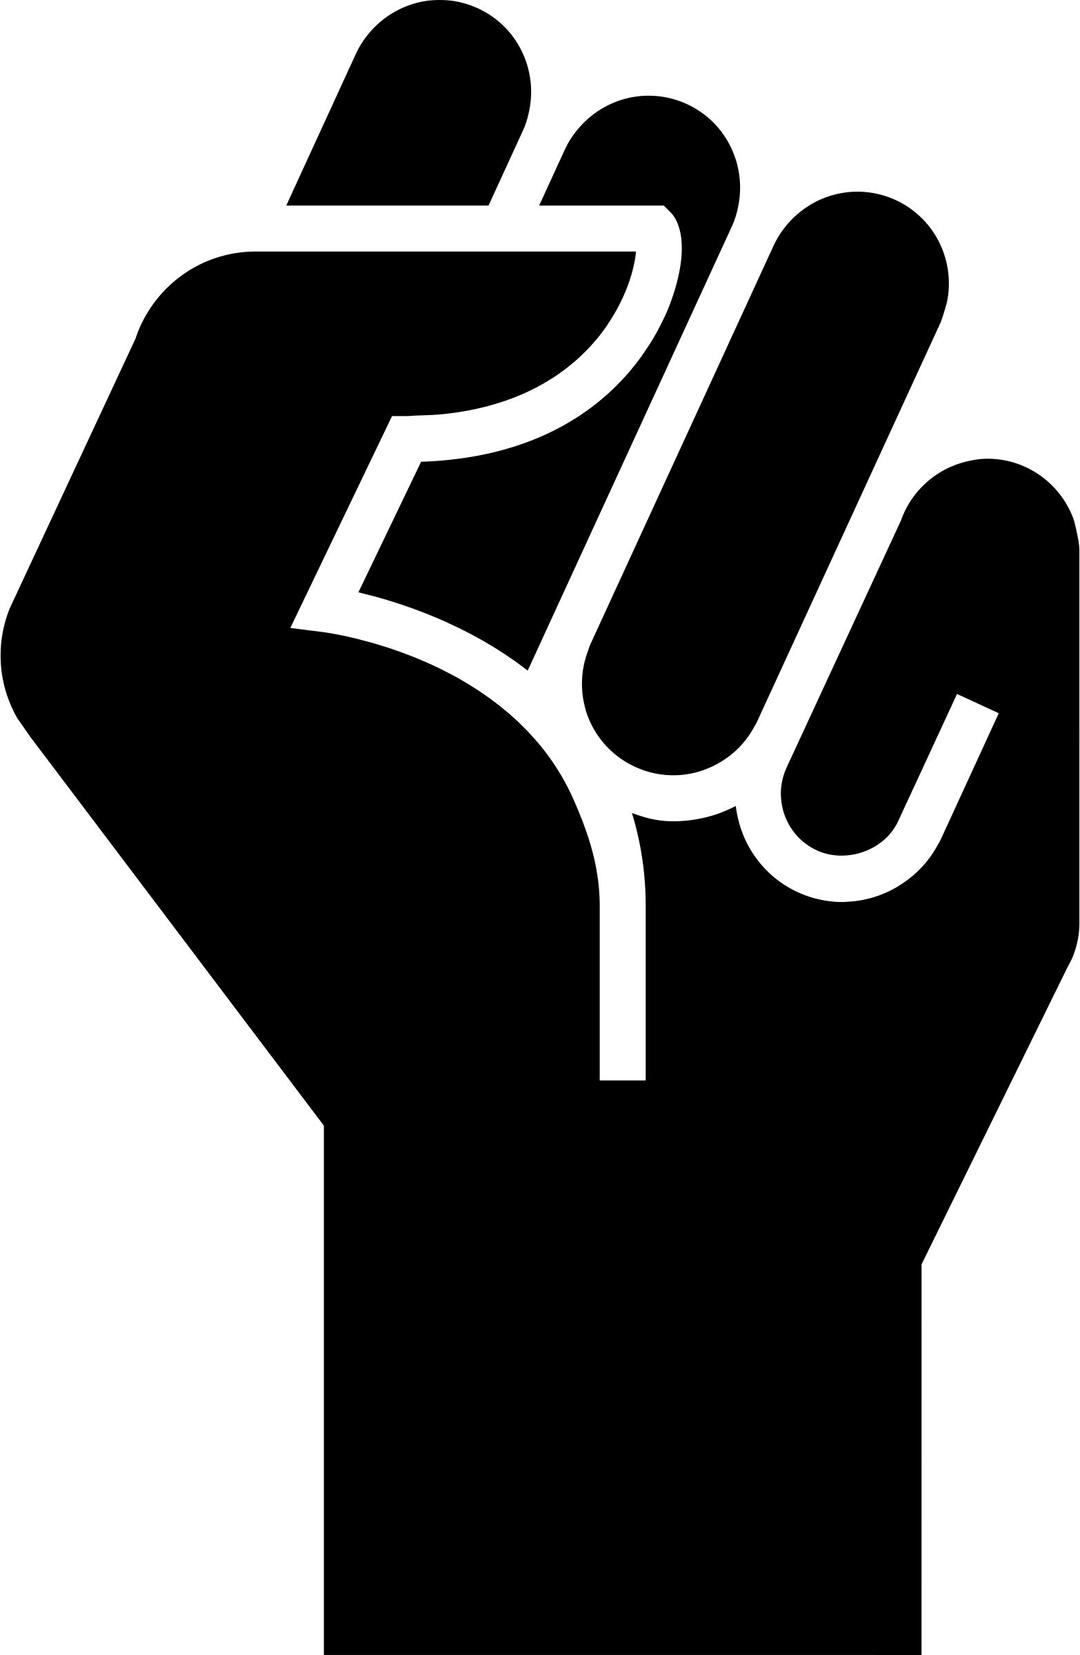 Protest icon png transparent